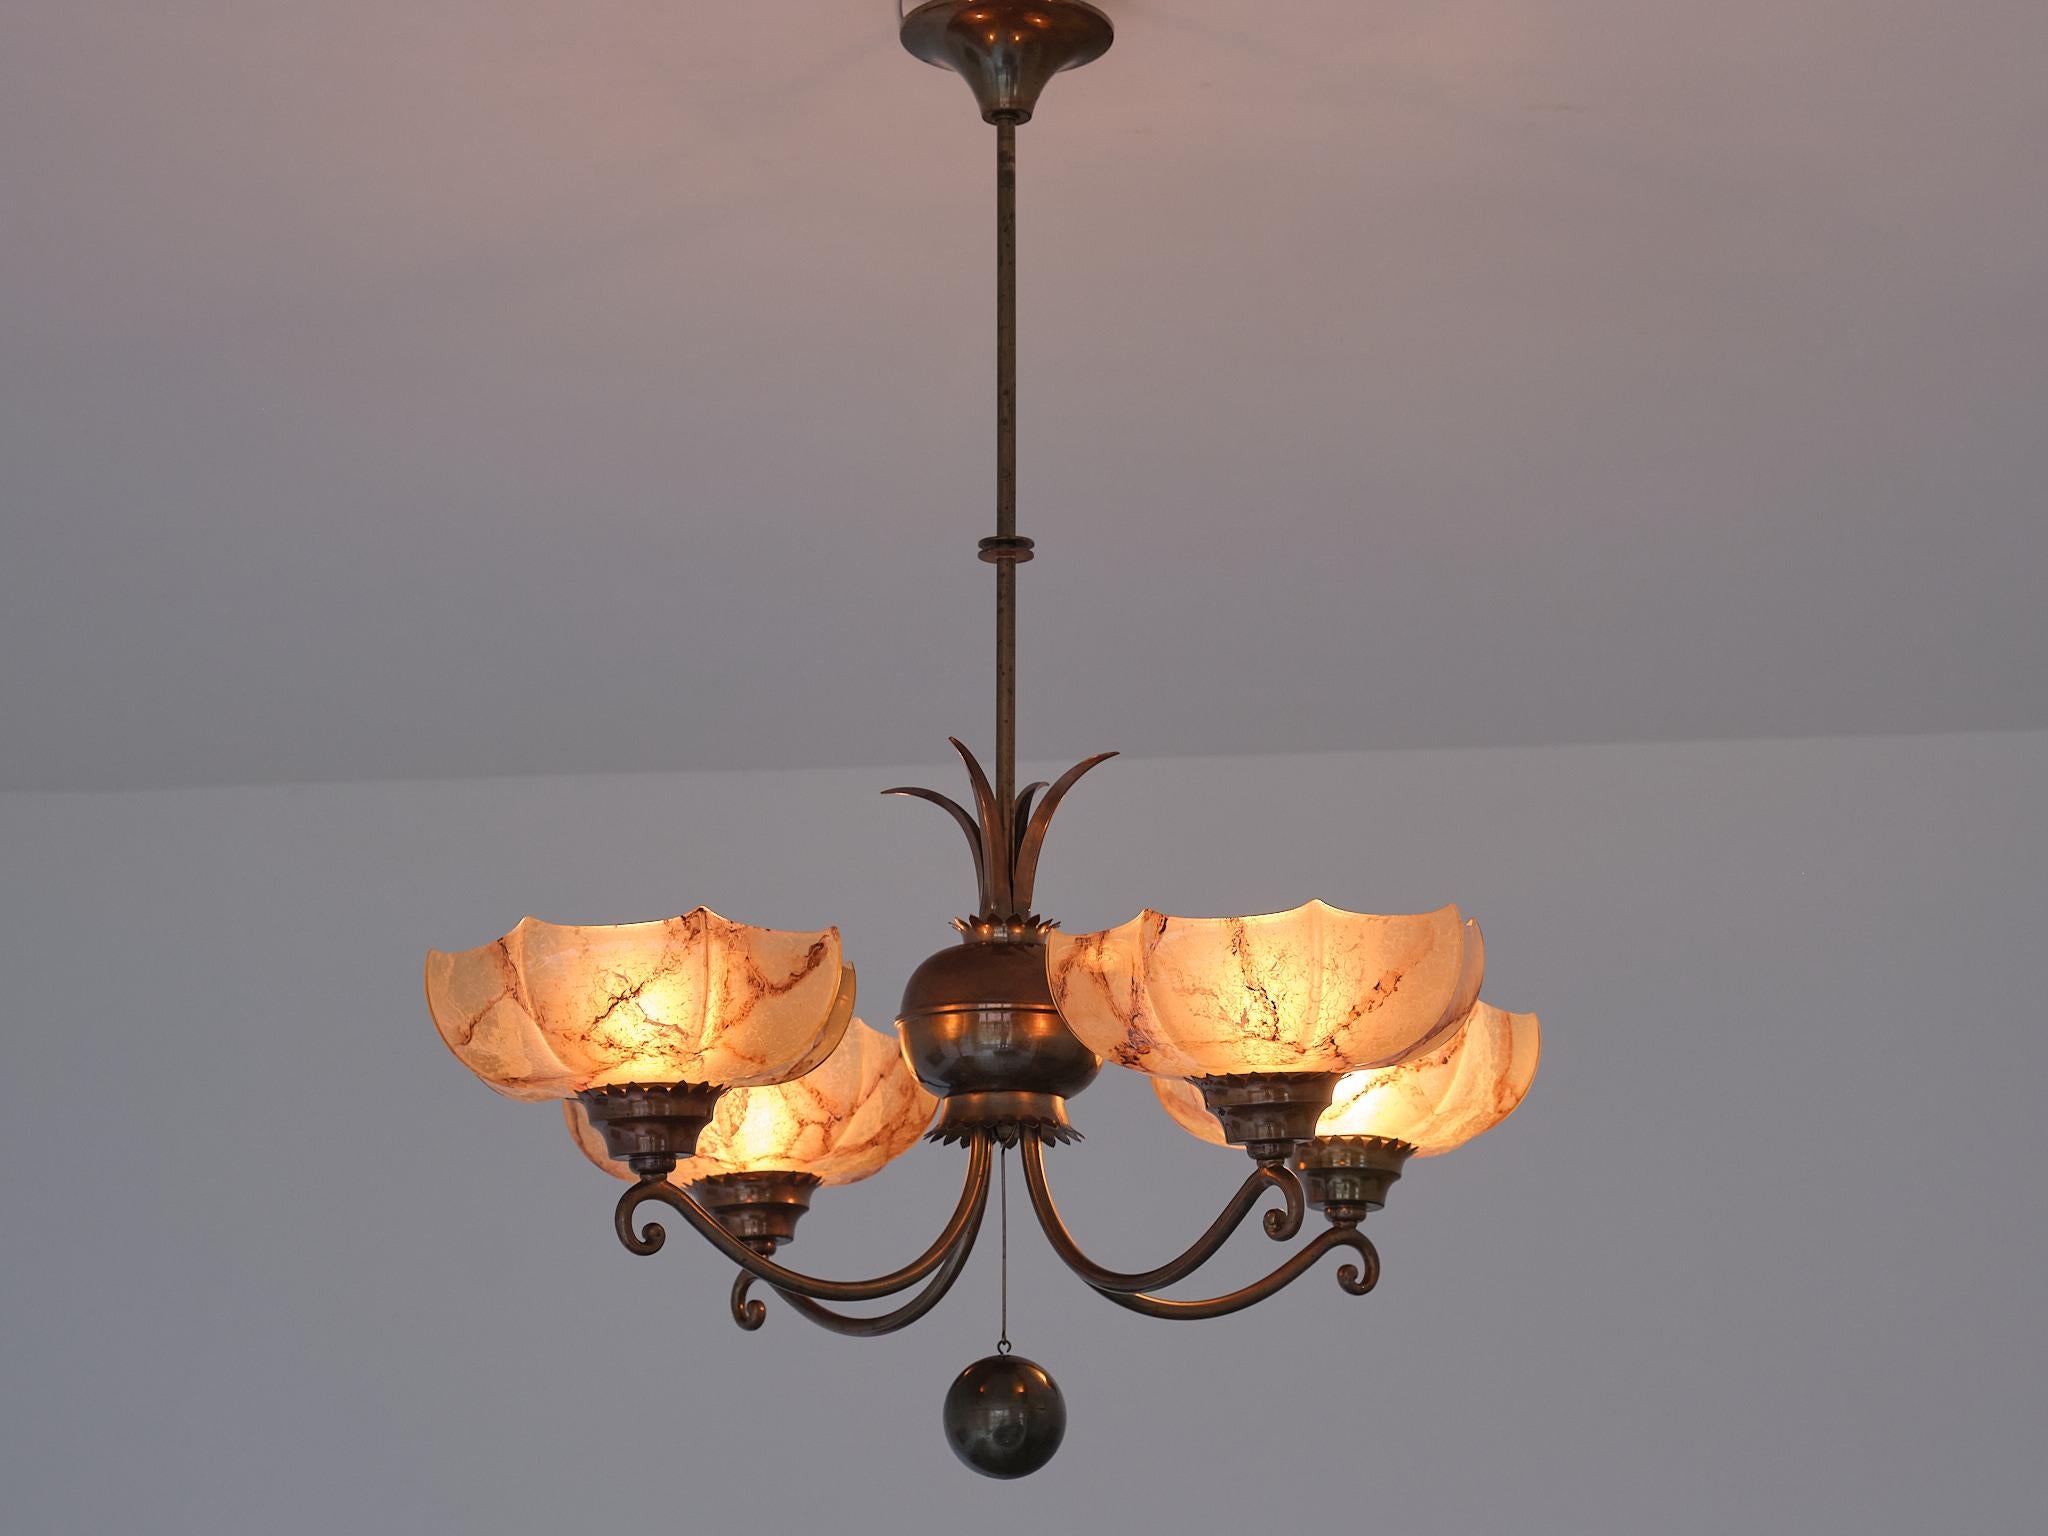 Harald Notini Chandelier in Brass and Marbled Glass, Böhlmarks, Sweden, 1927 For Sale 2